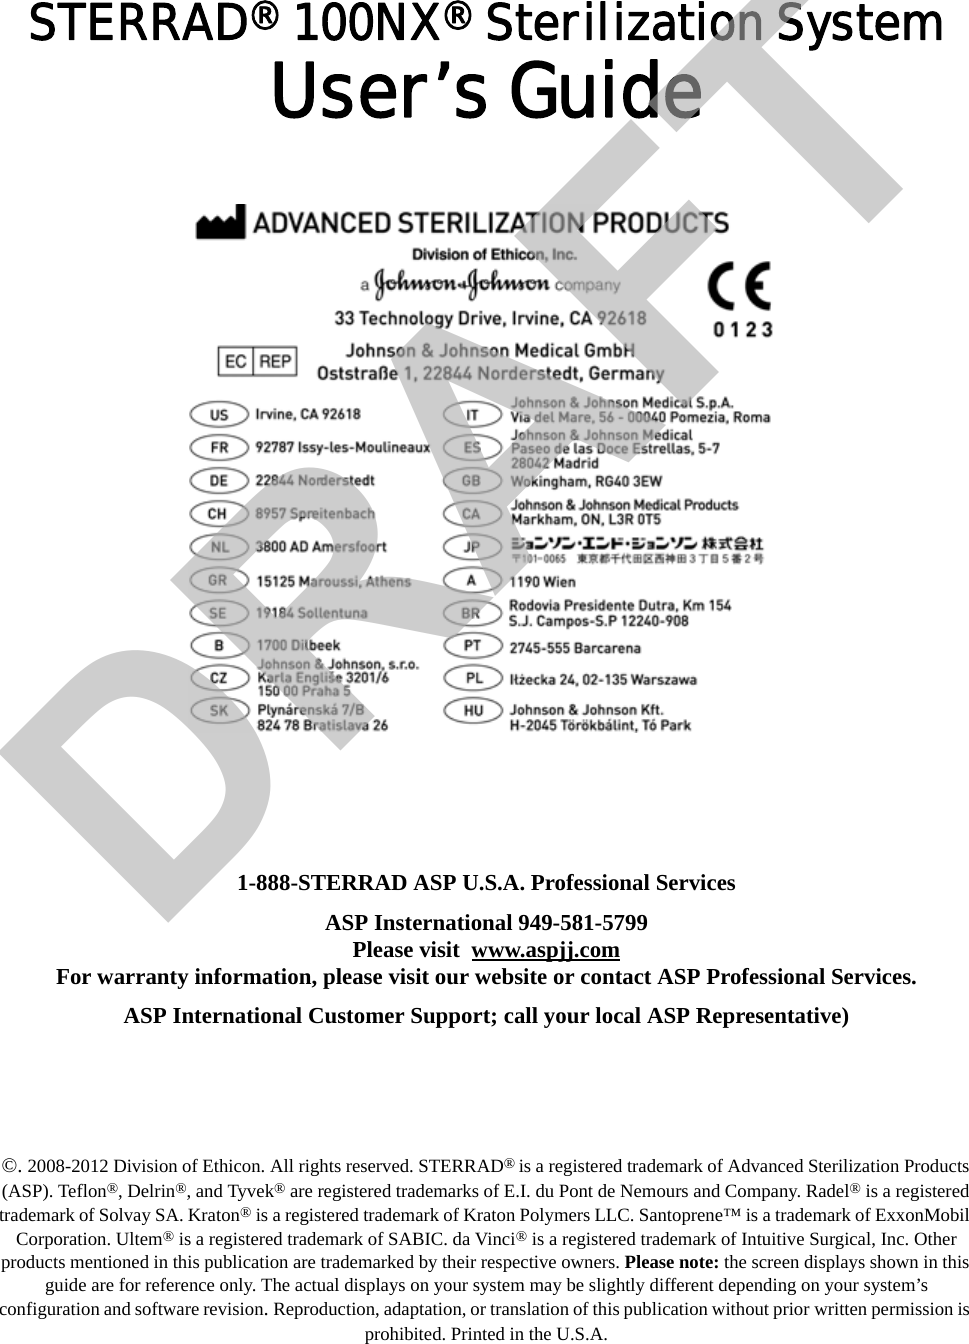 STERRAD® 100NX® Sterilization SystemUser’s Guide1-888-STERRAD ASP U.S.A. Professional ServicesASP Insternational 949-581-5799Please visit  www.aspjj.comFor warranty information, please visit our website or contact ASP Professional Services.ASP International Customer Support; call your local ASP Representative)©. 2008-2012 Division of Ethicon. All rights reserved. STERRAD® is a registered trademark of Advanced Sterilization Products (ASP). Teflon®, Delrin®, and Tyvek® are registered trademarks of E.I. du Pont de Nemours and Company. Radel® is a registered trademark of Solvay SA. Kraton® is a registered trademark of Kraton Polymers LLC. Santoprene™ is a trademark of ExxonMobil Corporation. Ultem® is a registered trademark of SABIC. da Vinci® is a registered trademark of Intuitive Surgical, Inc. Other products mentioned in this publication are trademarked by their respective owners. Please note: the screen displays shown in this guide are for reference only. The actual displays on your system may be slightly different depending on your system’s configuration and software revision. Reproduction, adaptation, or translation of this publication without prior written permission is prohibited. Printed in the U.S.A. DRAFT